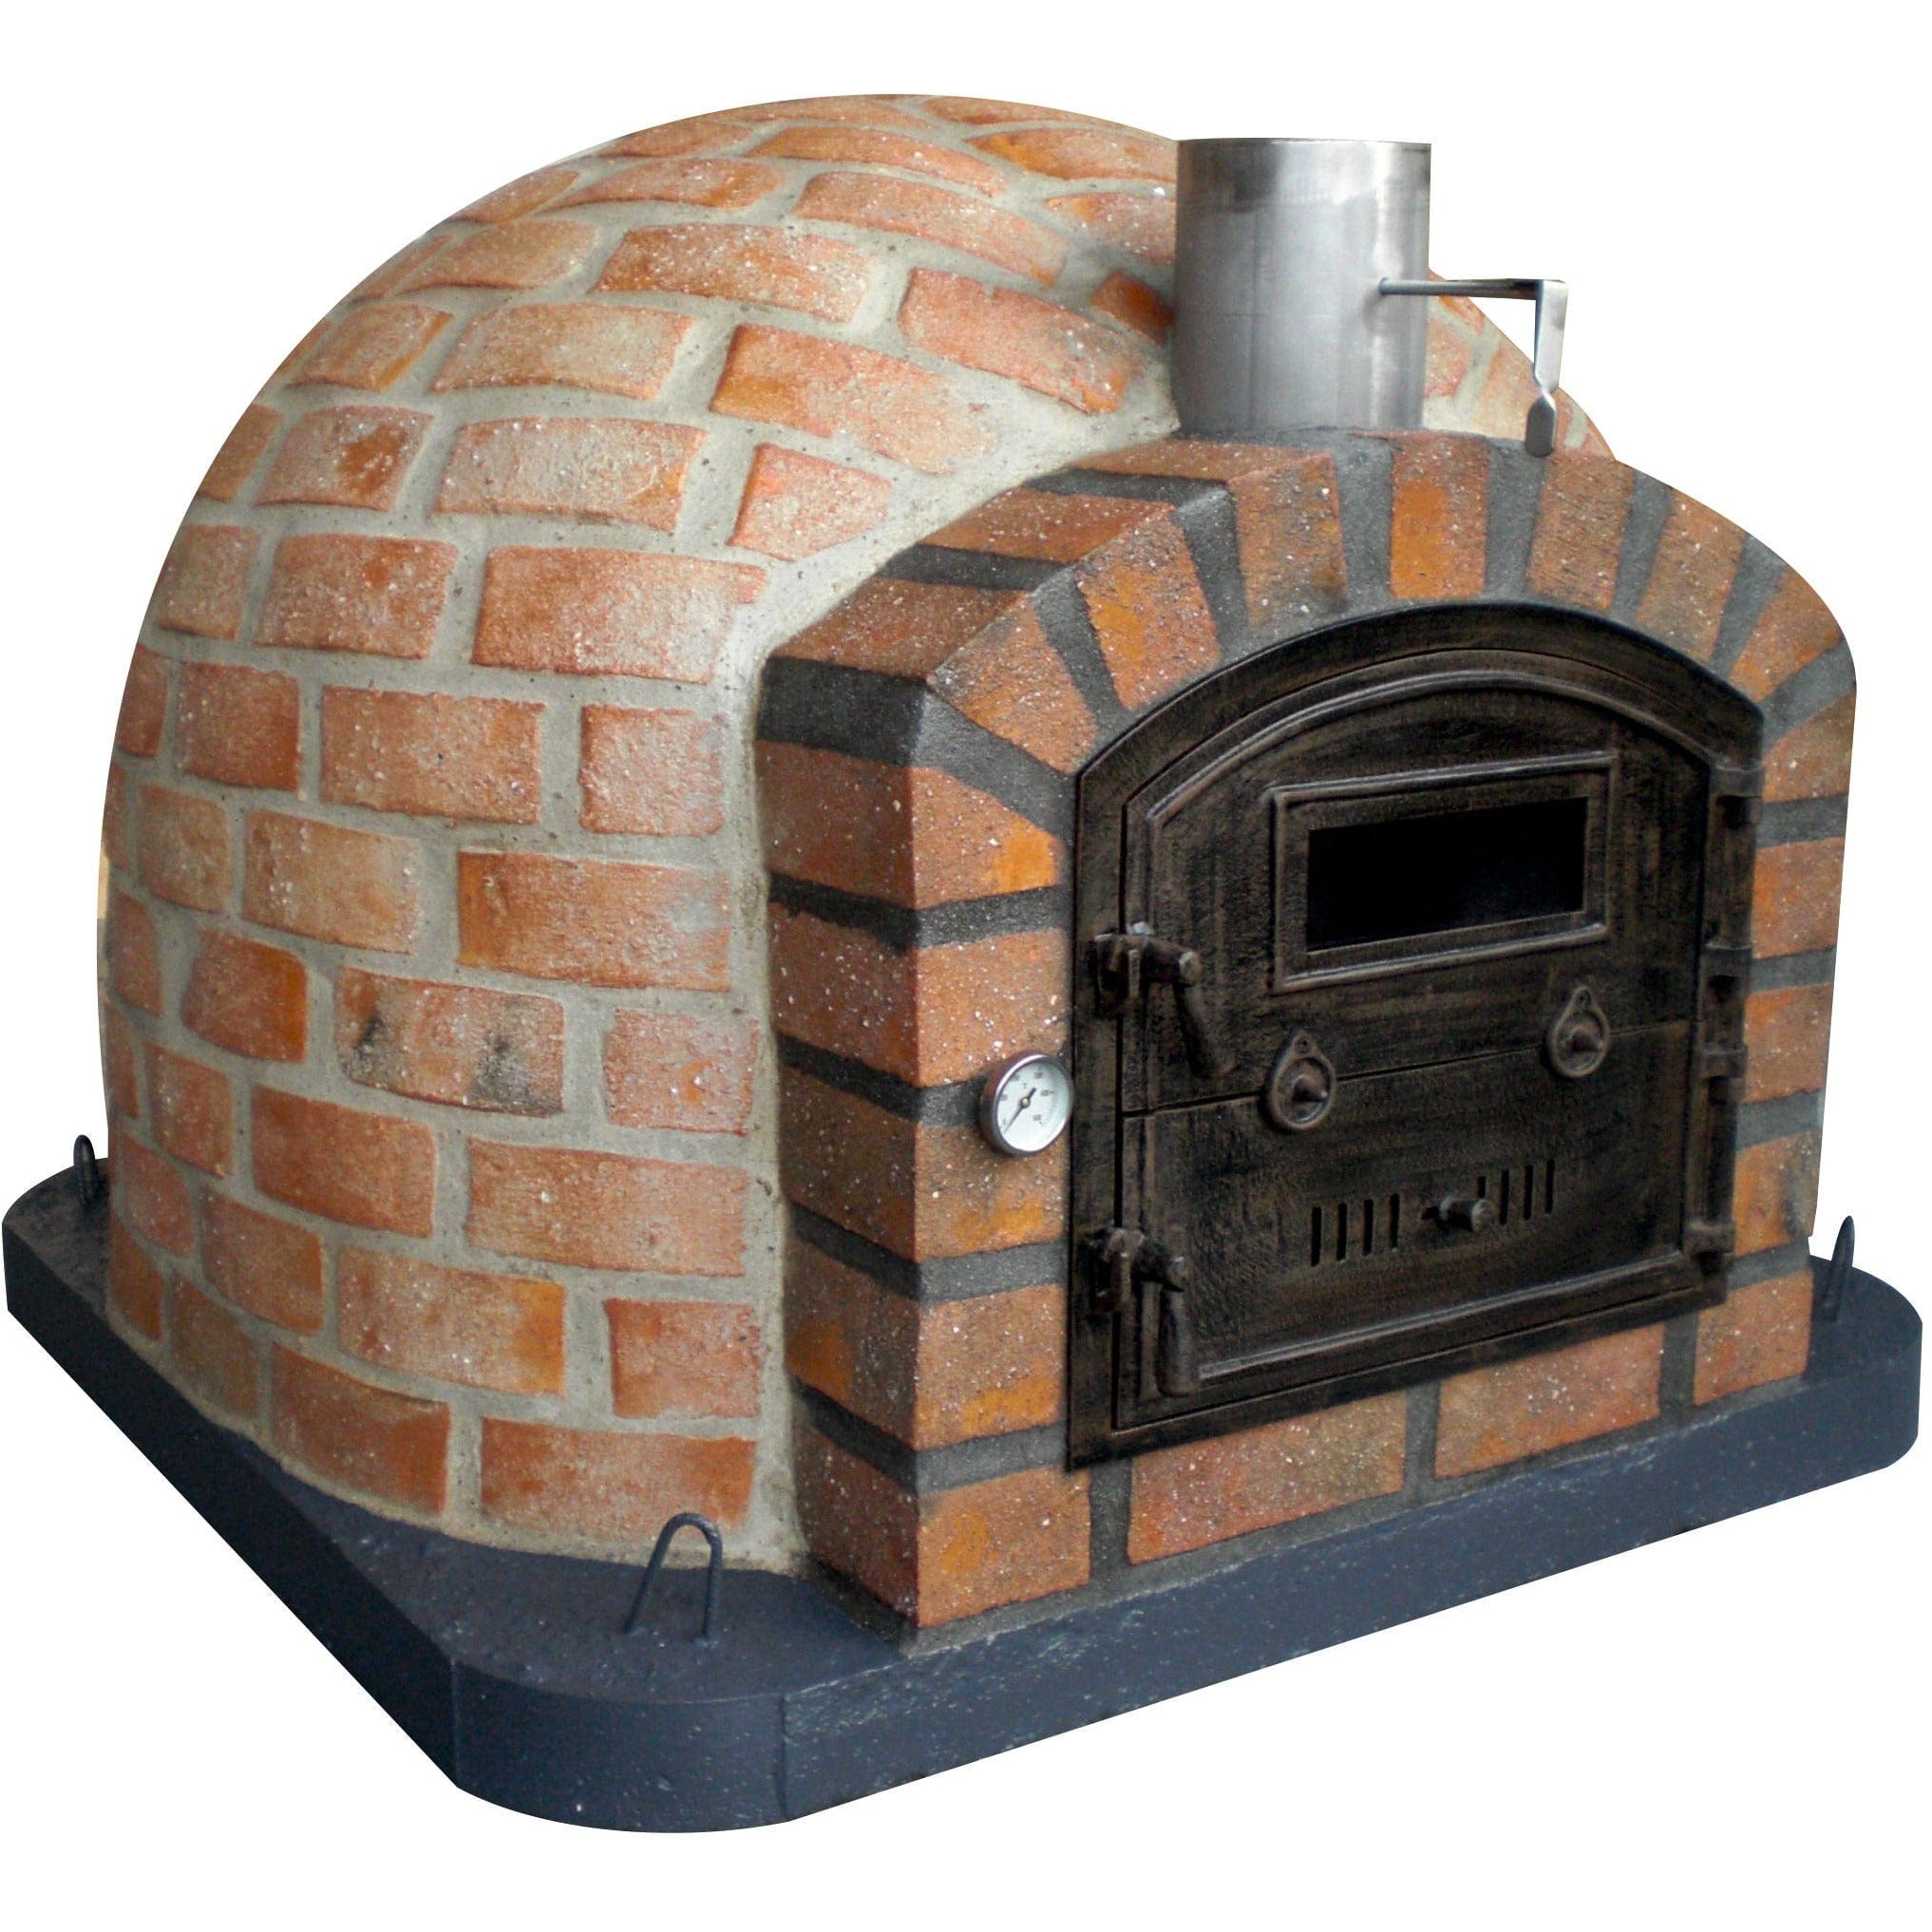 Authentic Pizza Ovens- Rustic Lisboa Premium Pizza Oven-Wood Fired